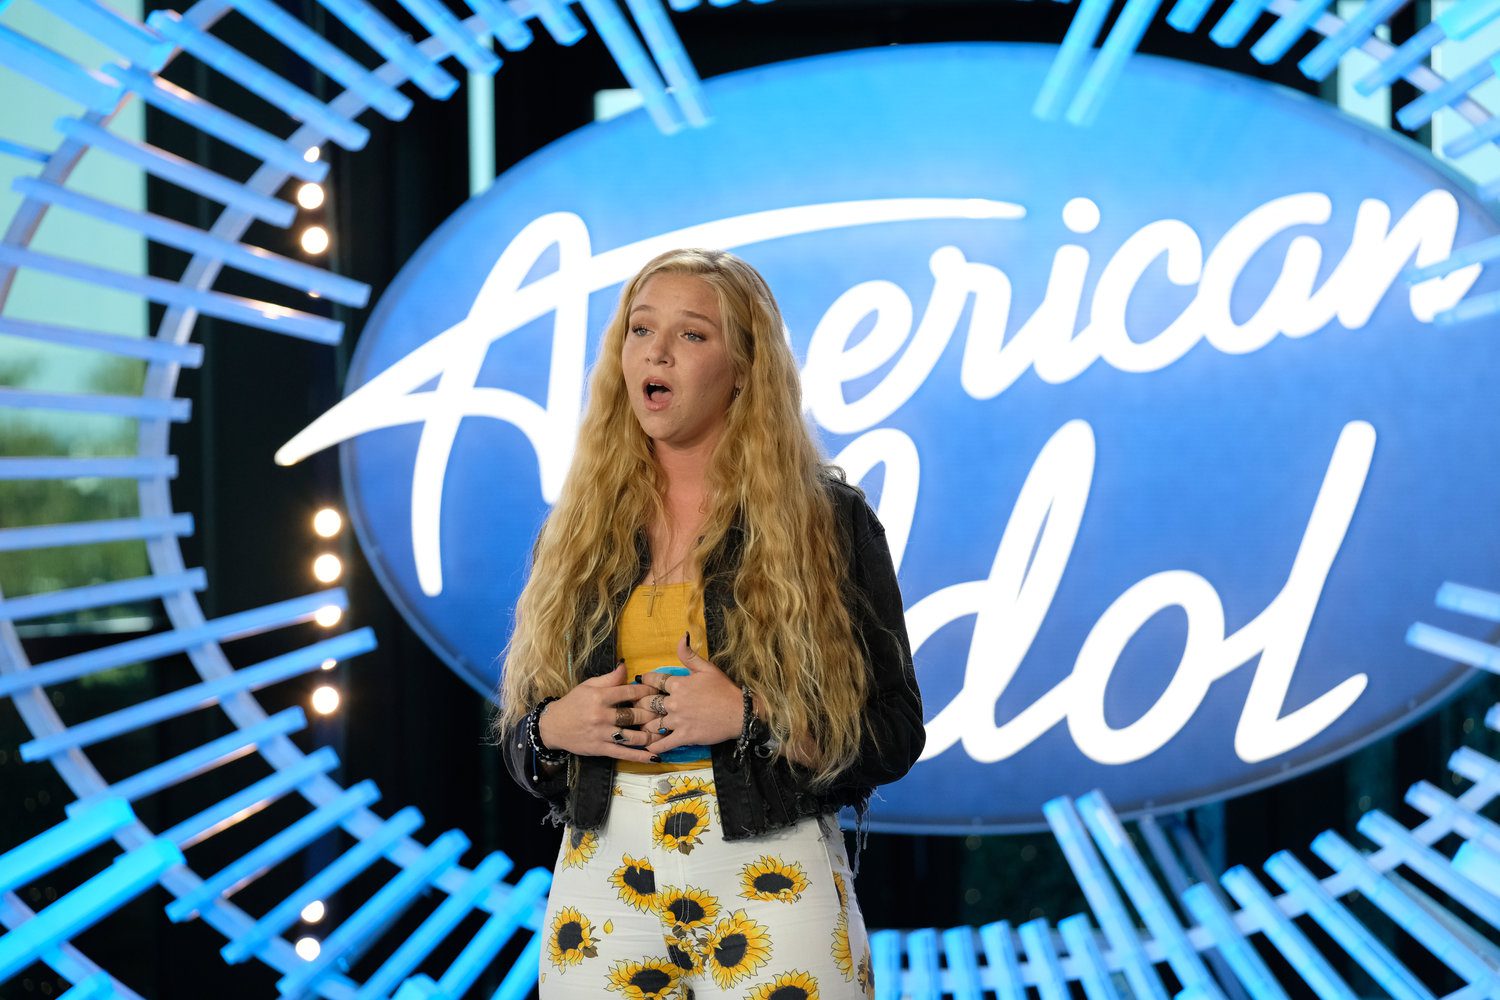 Shannon Gibbons- our most amazing singer – on American Idol 2020!